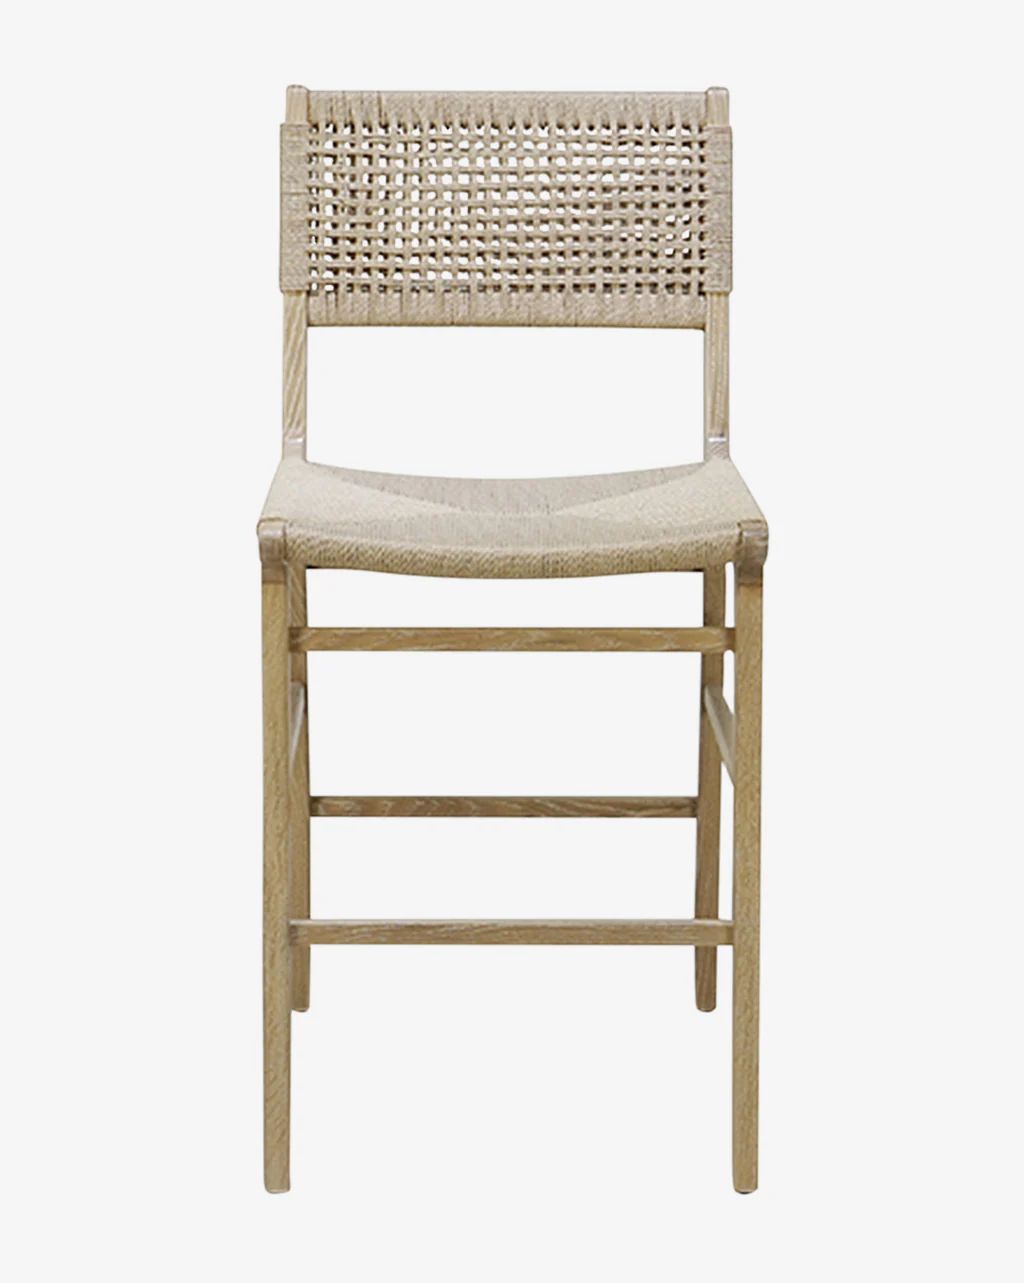 Anise Stool | McGee & Co. (US)